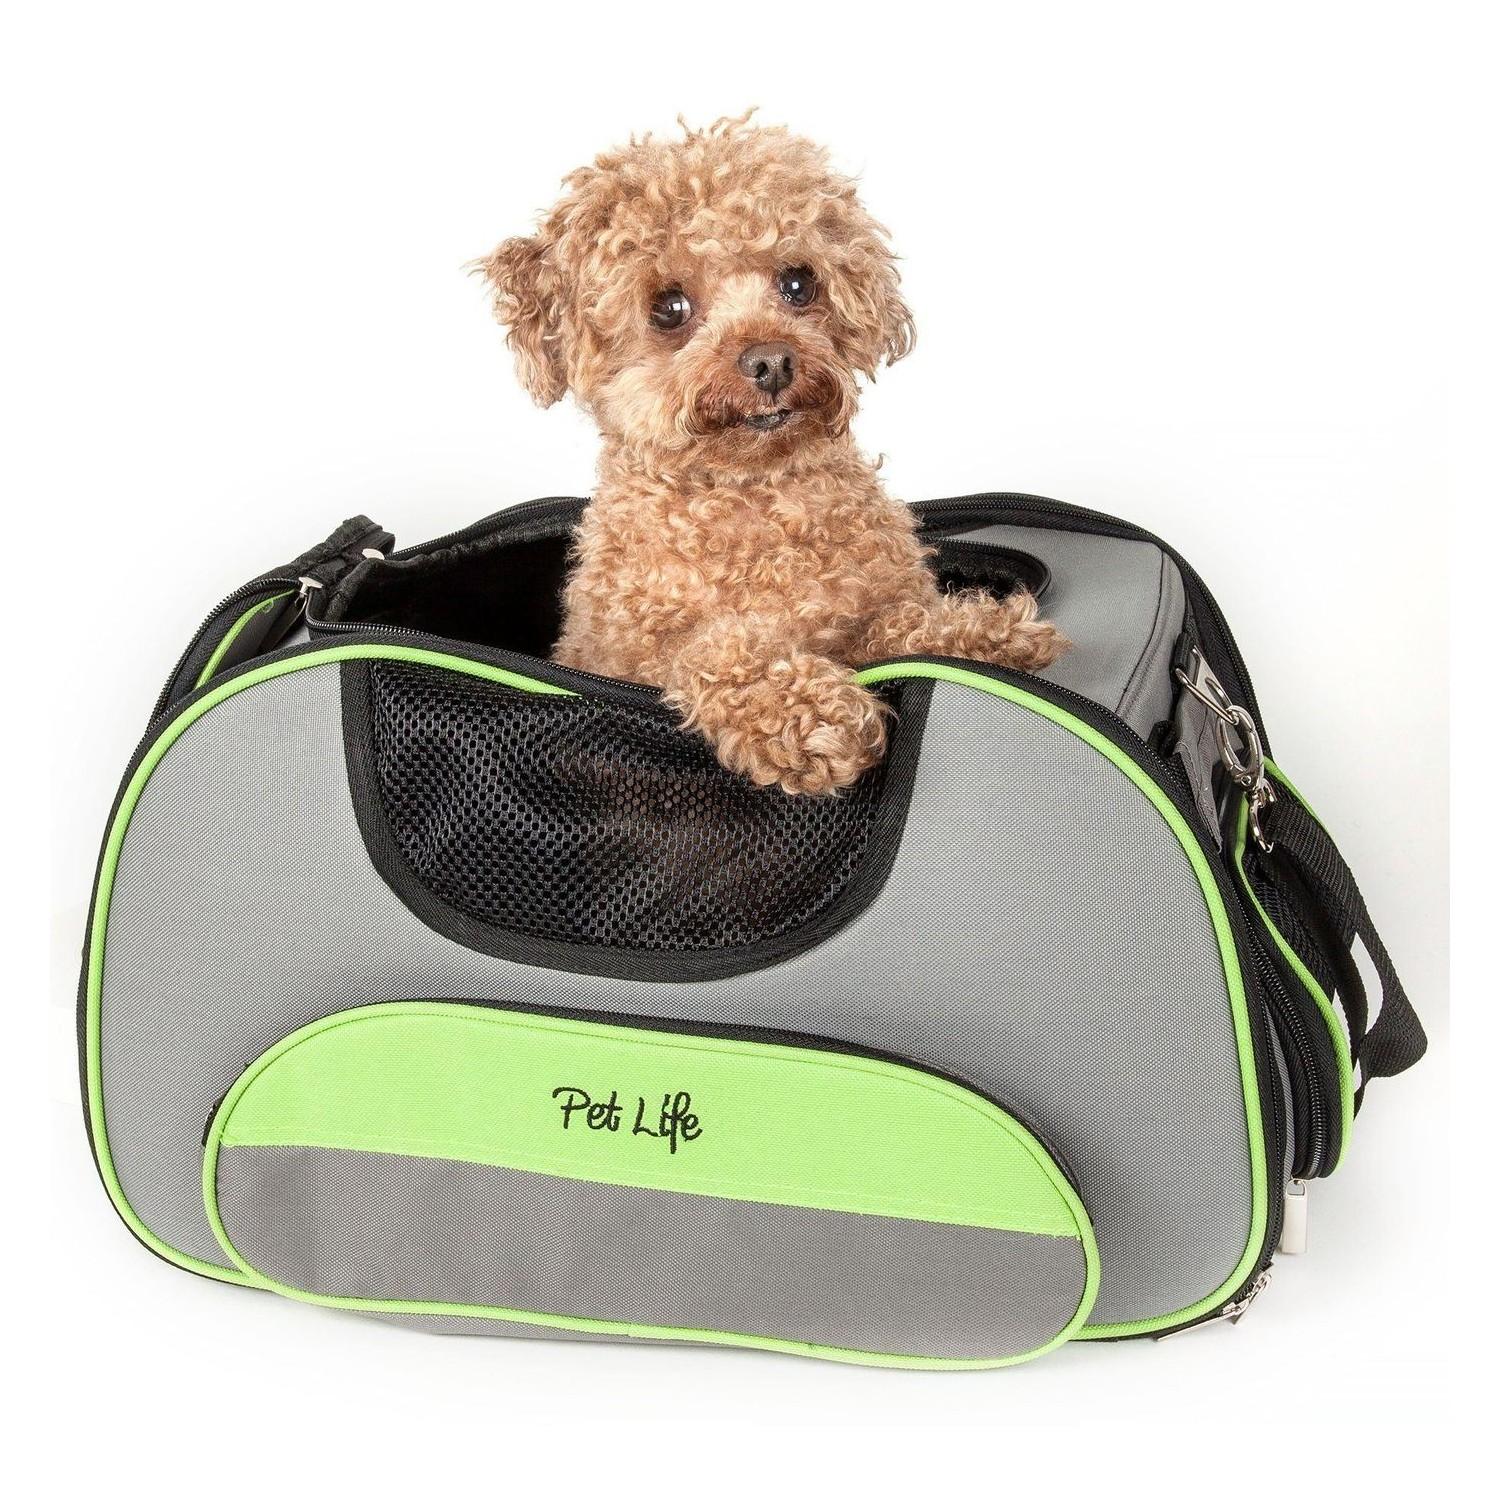 Pet Life Sky-Max Sporty Dog Carrier - Gray